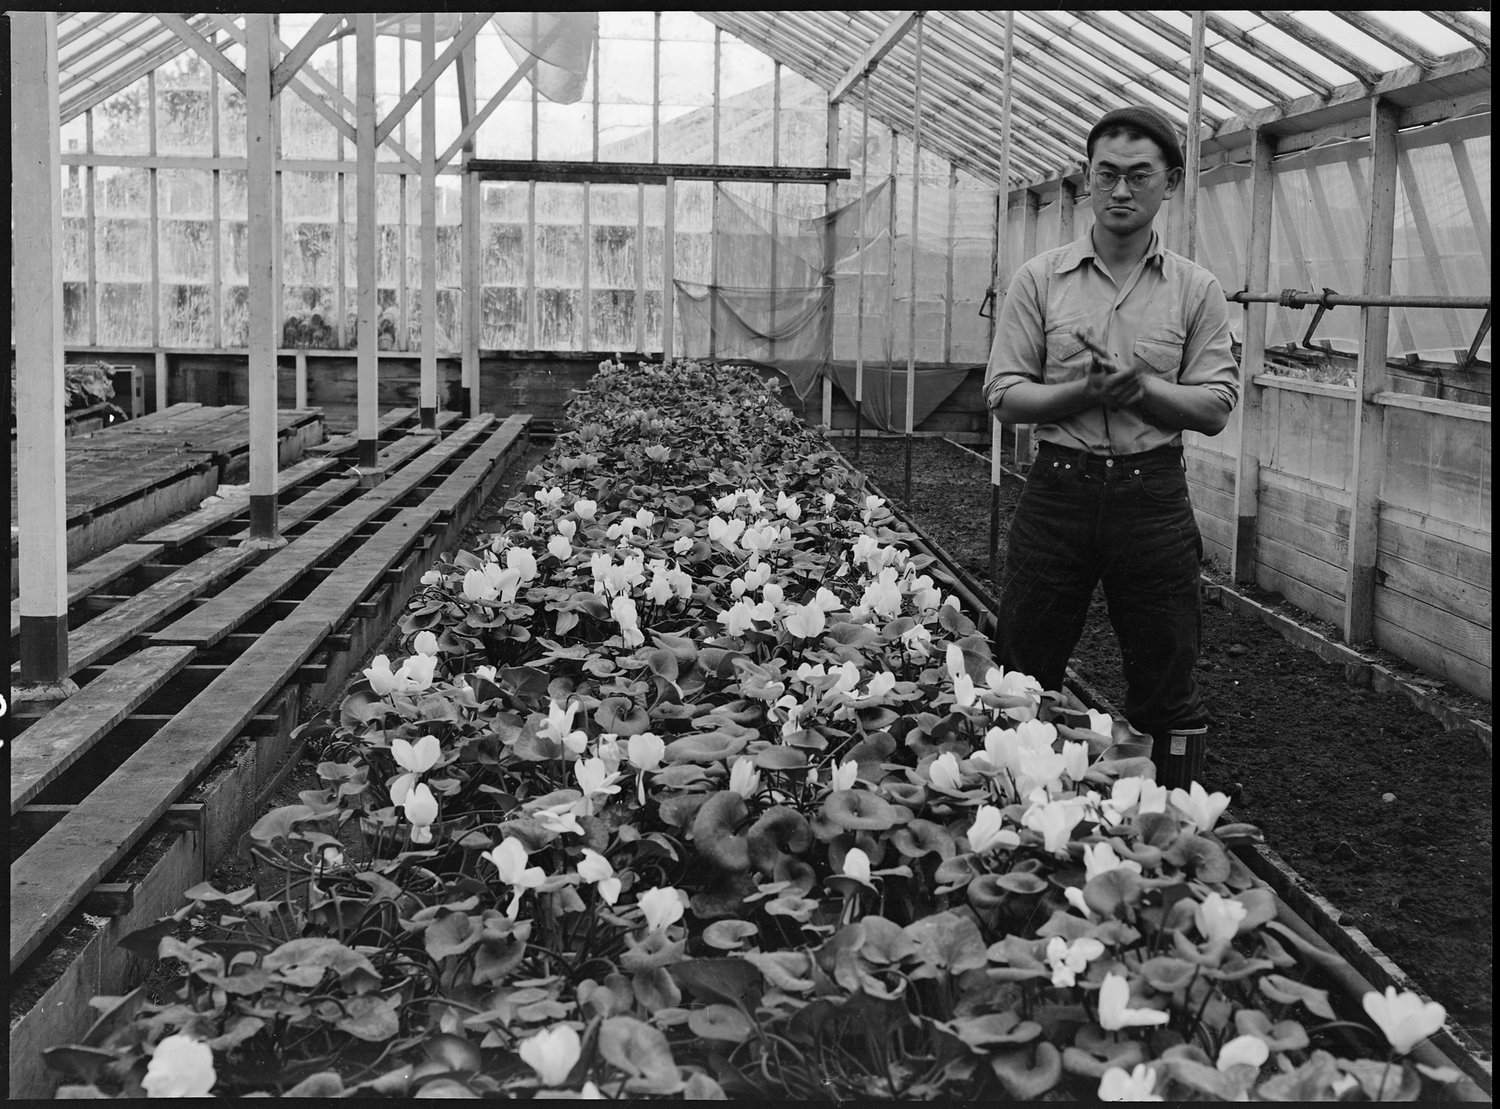  PRINT AVAILABLE San Leandro, California. Greenhouse on nursery operated, before evacuation, by horticultural experts of Japanese ancestry. Many of the Nisei (born in this country) attended leading agricultural colleges such as that at Cornell. Evacuees will be housed in War Relocation Authority centers for the duration. 